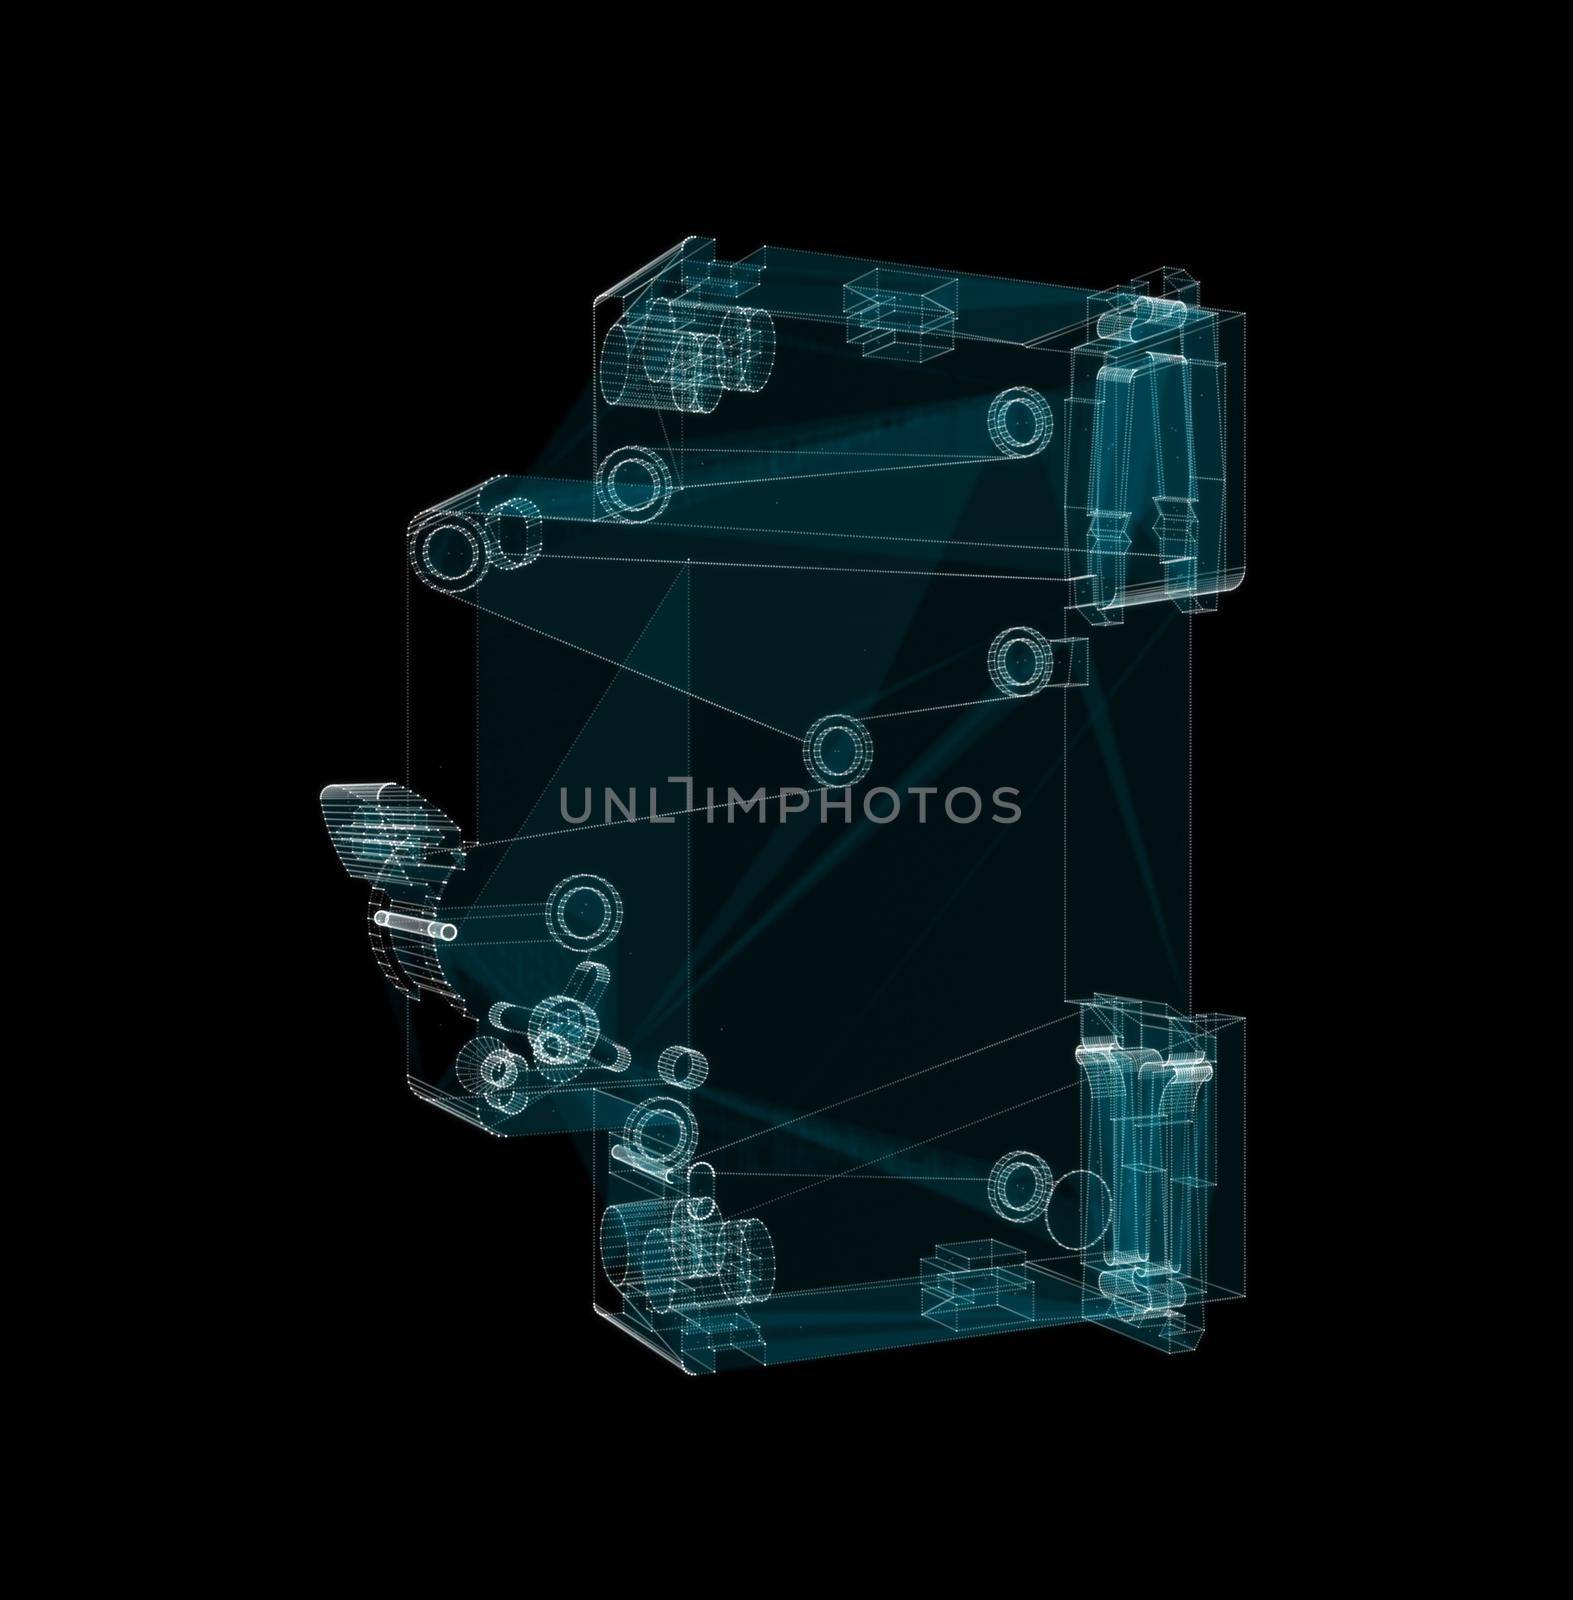 Differential circuit breaker Hologram. Industrial and Technology Concept. 3d illustration